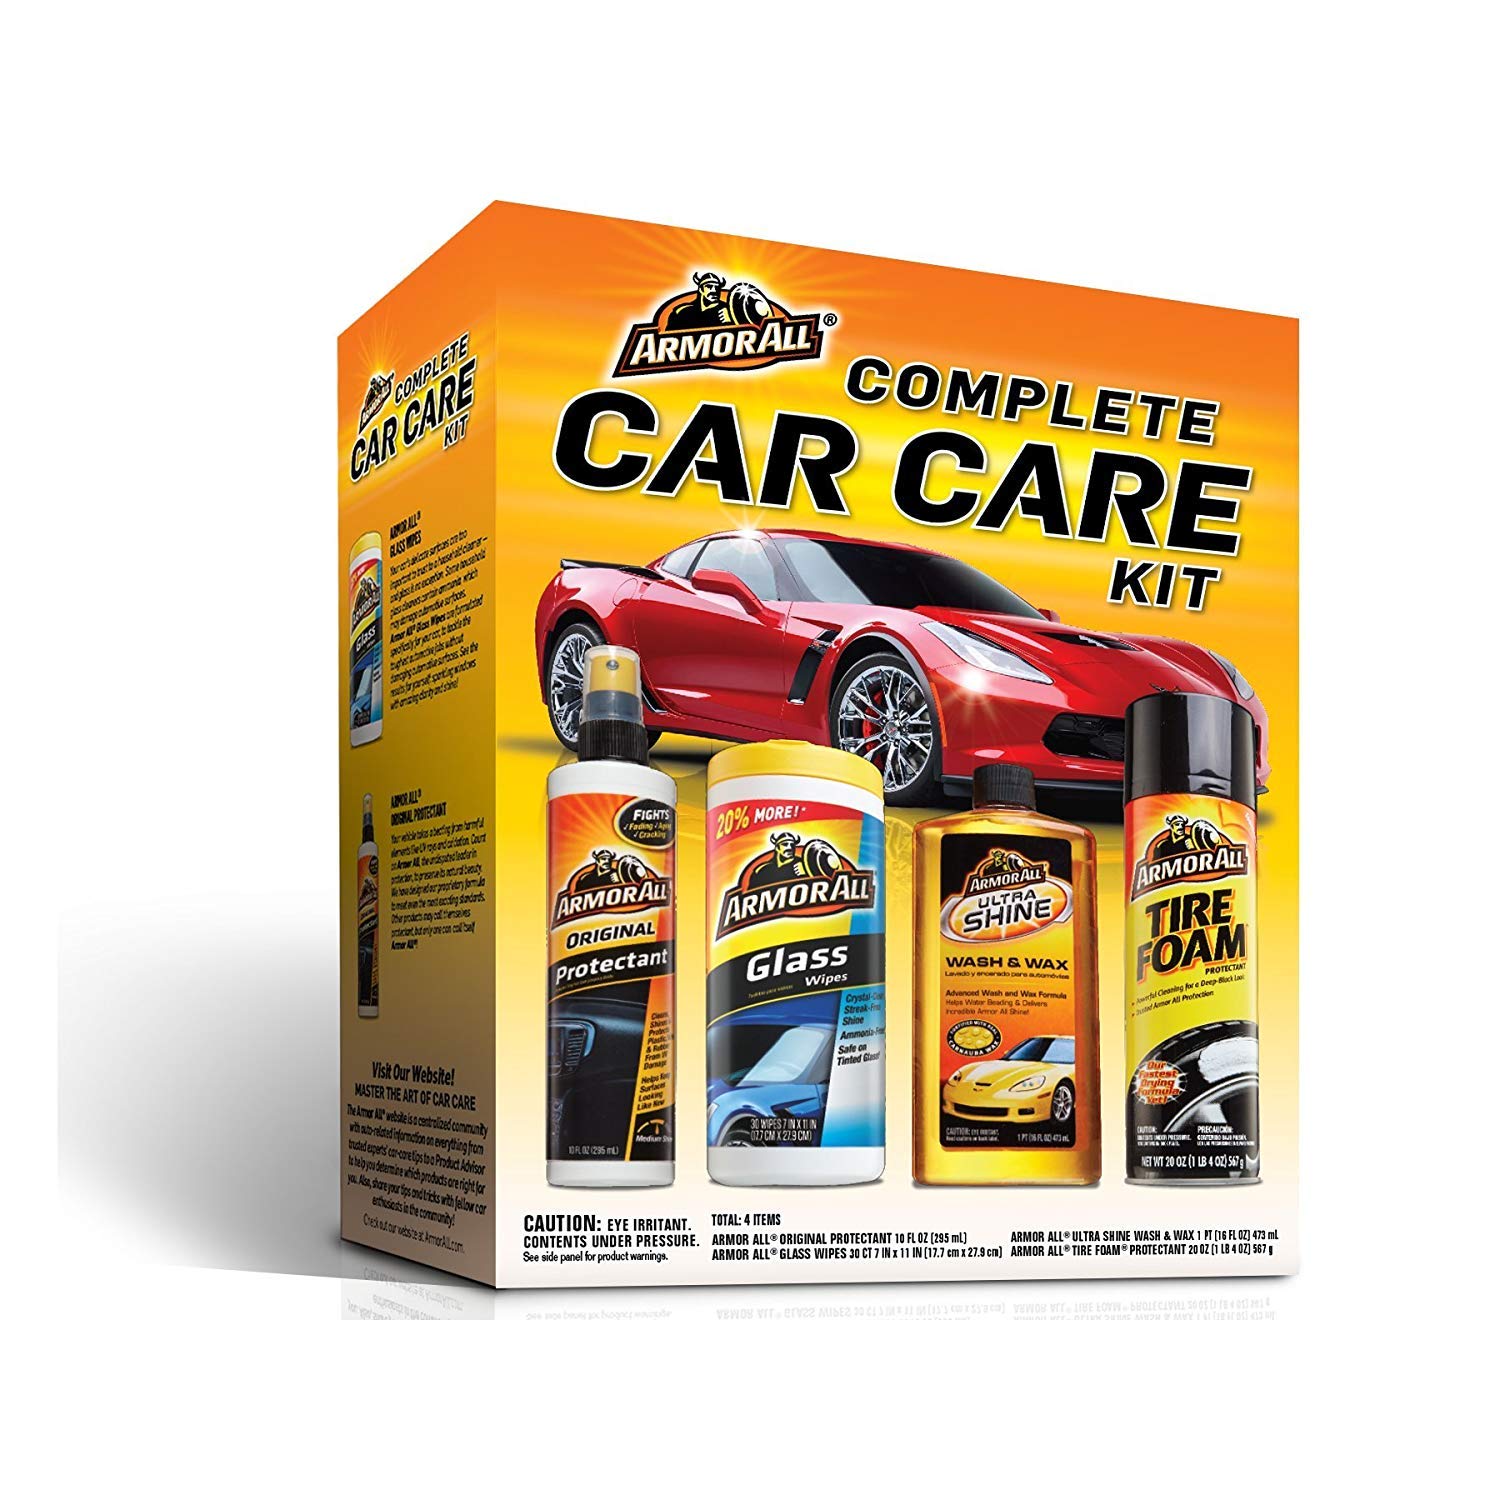 Armor All Complete Car Care Kit (1 Count) (4 Items Included) - 2 Pack